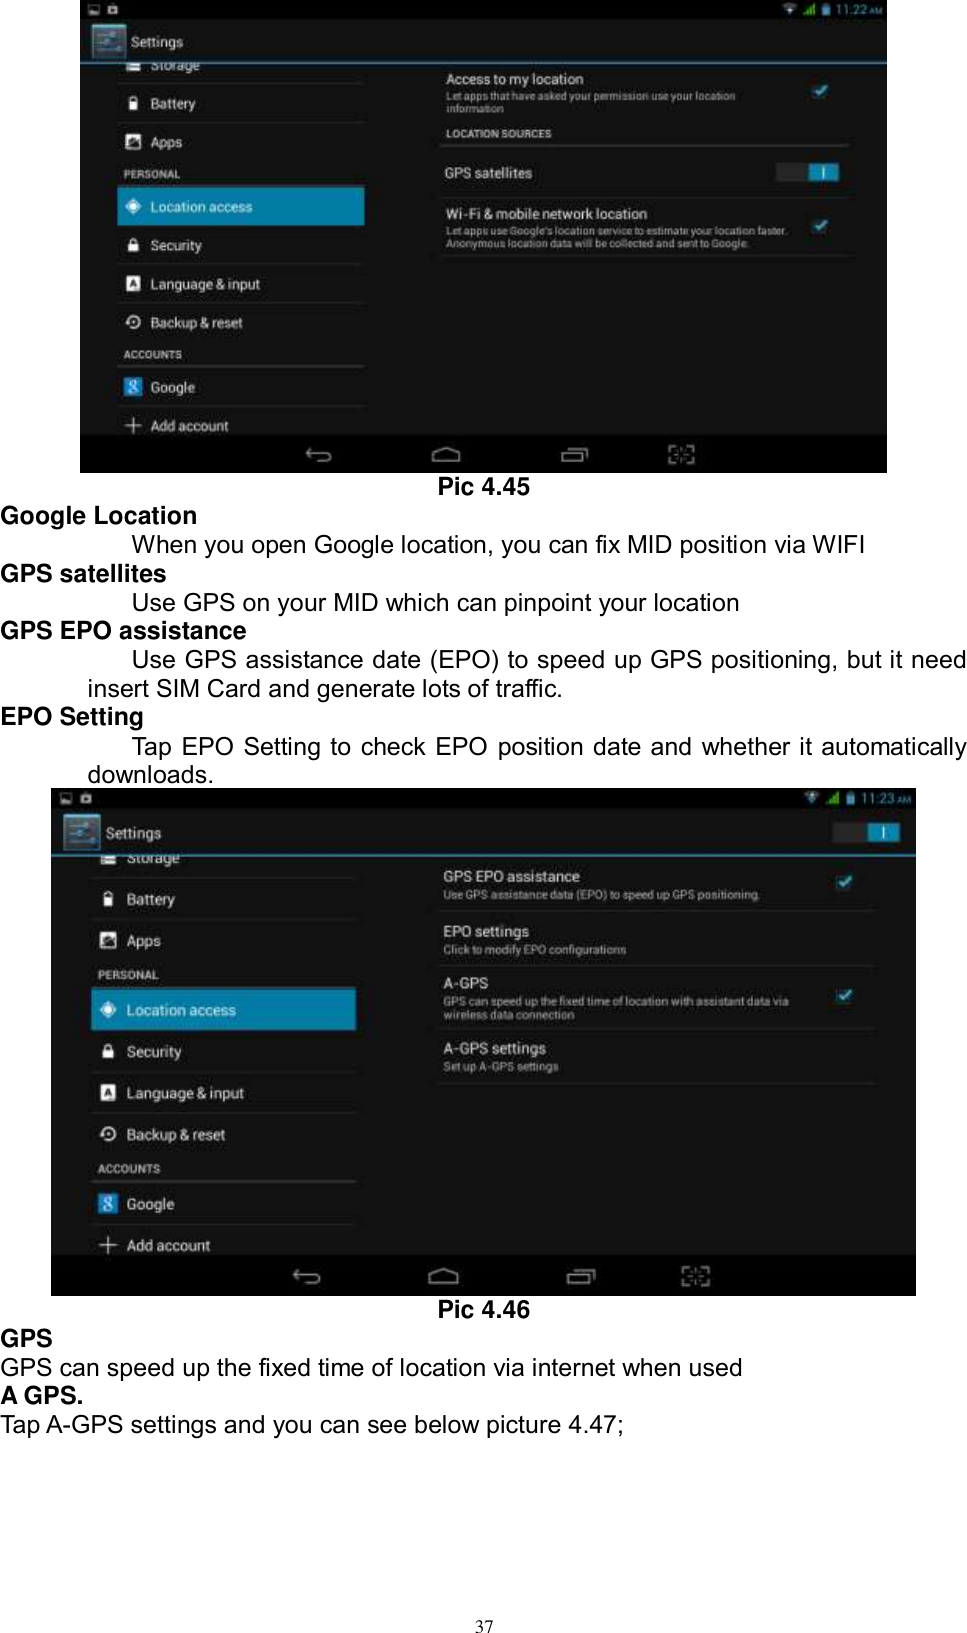      37  Pic 4.45 Google Location When you open Google location, you can fix MID position via WIFI GPS satellites Use GPS on your MID which can pinpoint your location GPS EPO assistance Use GPS assistance date (EPO) to speed up GPS positioning, but it need insert SIM Card and generate lots of traffic. EPO Setting Tap EPO Setting to check EPO position date and whether it automatically downloads.    Pic 4.46 GPS GPS can speed up the fixed time of location via internet when used A GPS. Tap A-GPS settings and you can see below picture 4.47; 